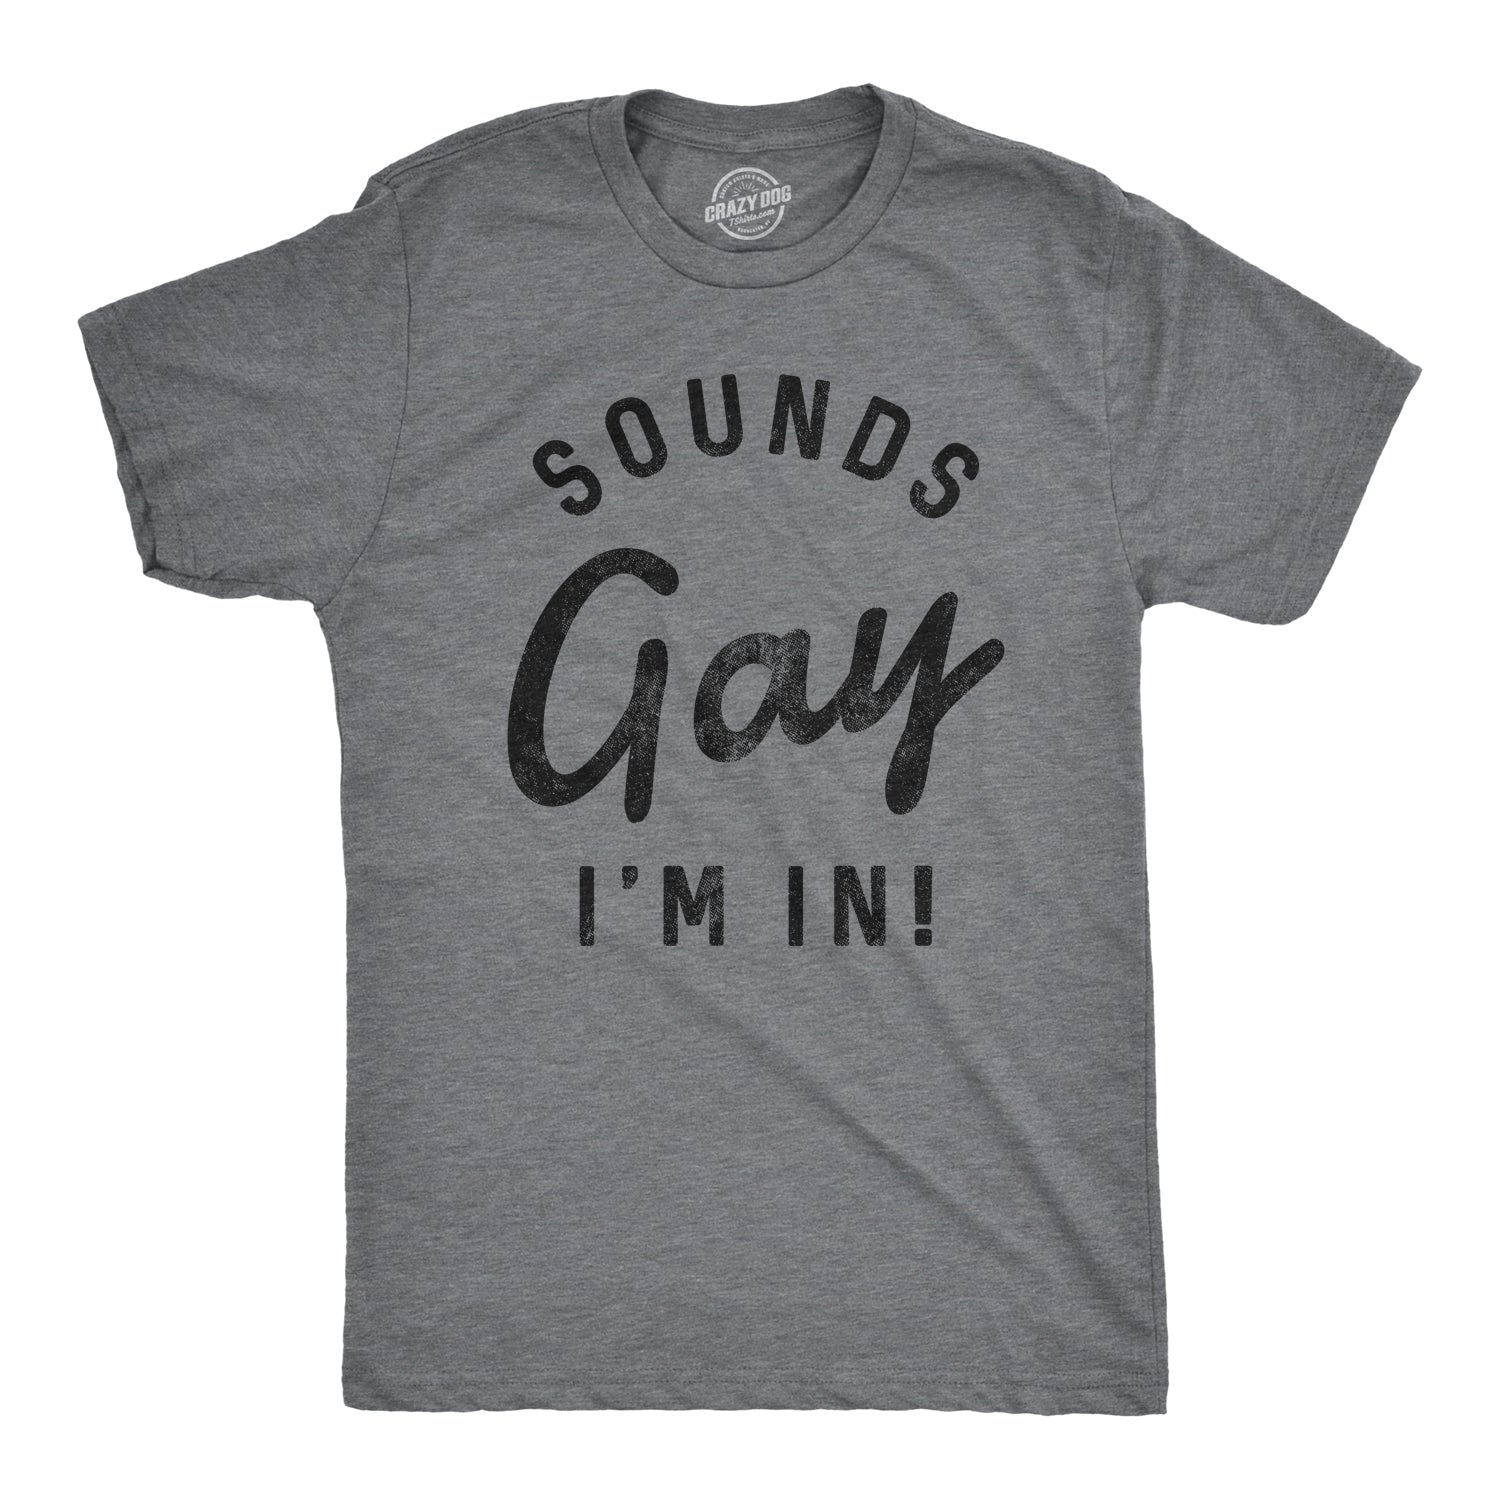 Funny Dark Heather Grey - Sounds Gay Sounds Gay I'm In Mens T Shirt Nerdy Pride Tee